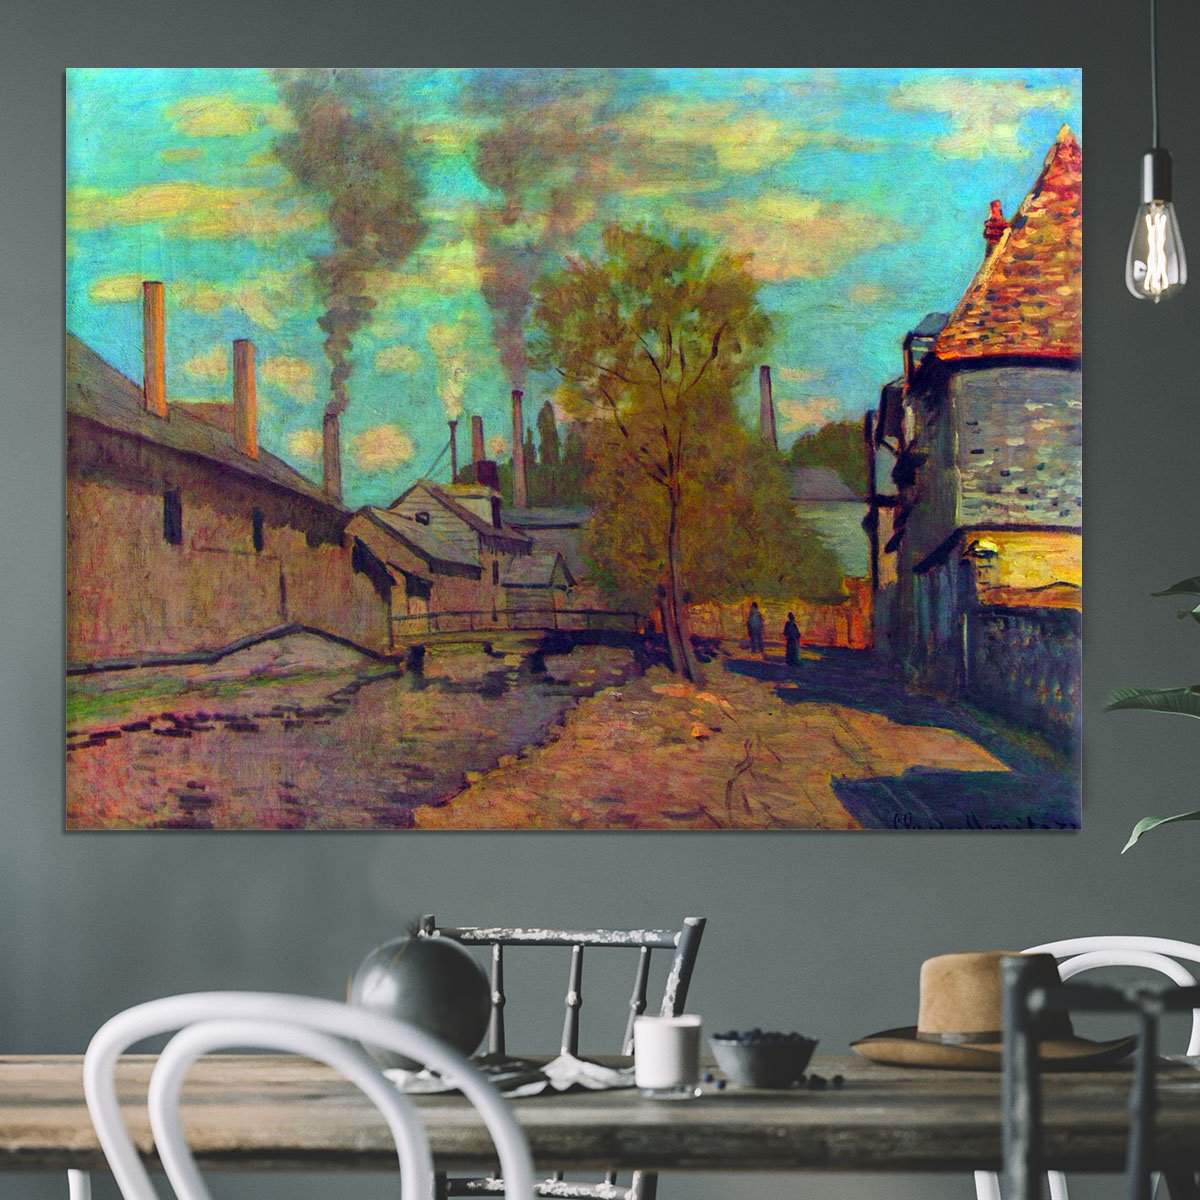 The stream of Robec by Claude Monet Canvas Print or Poster